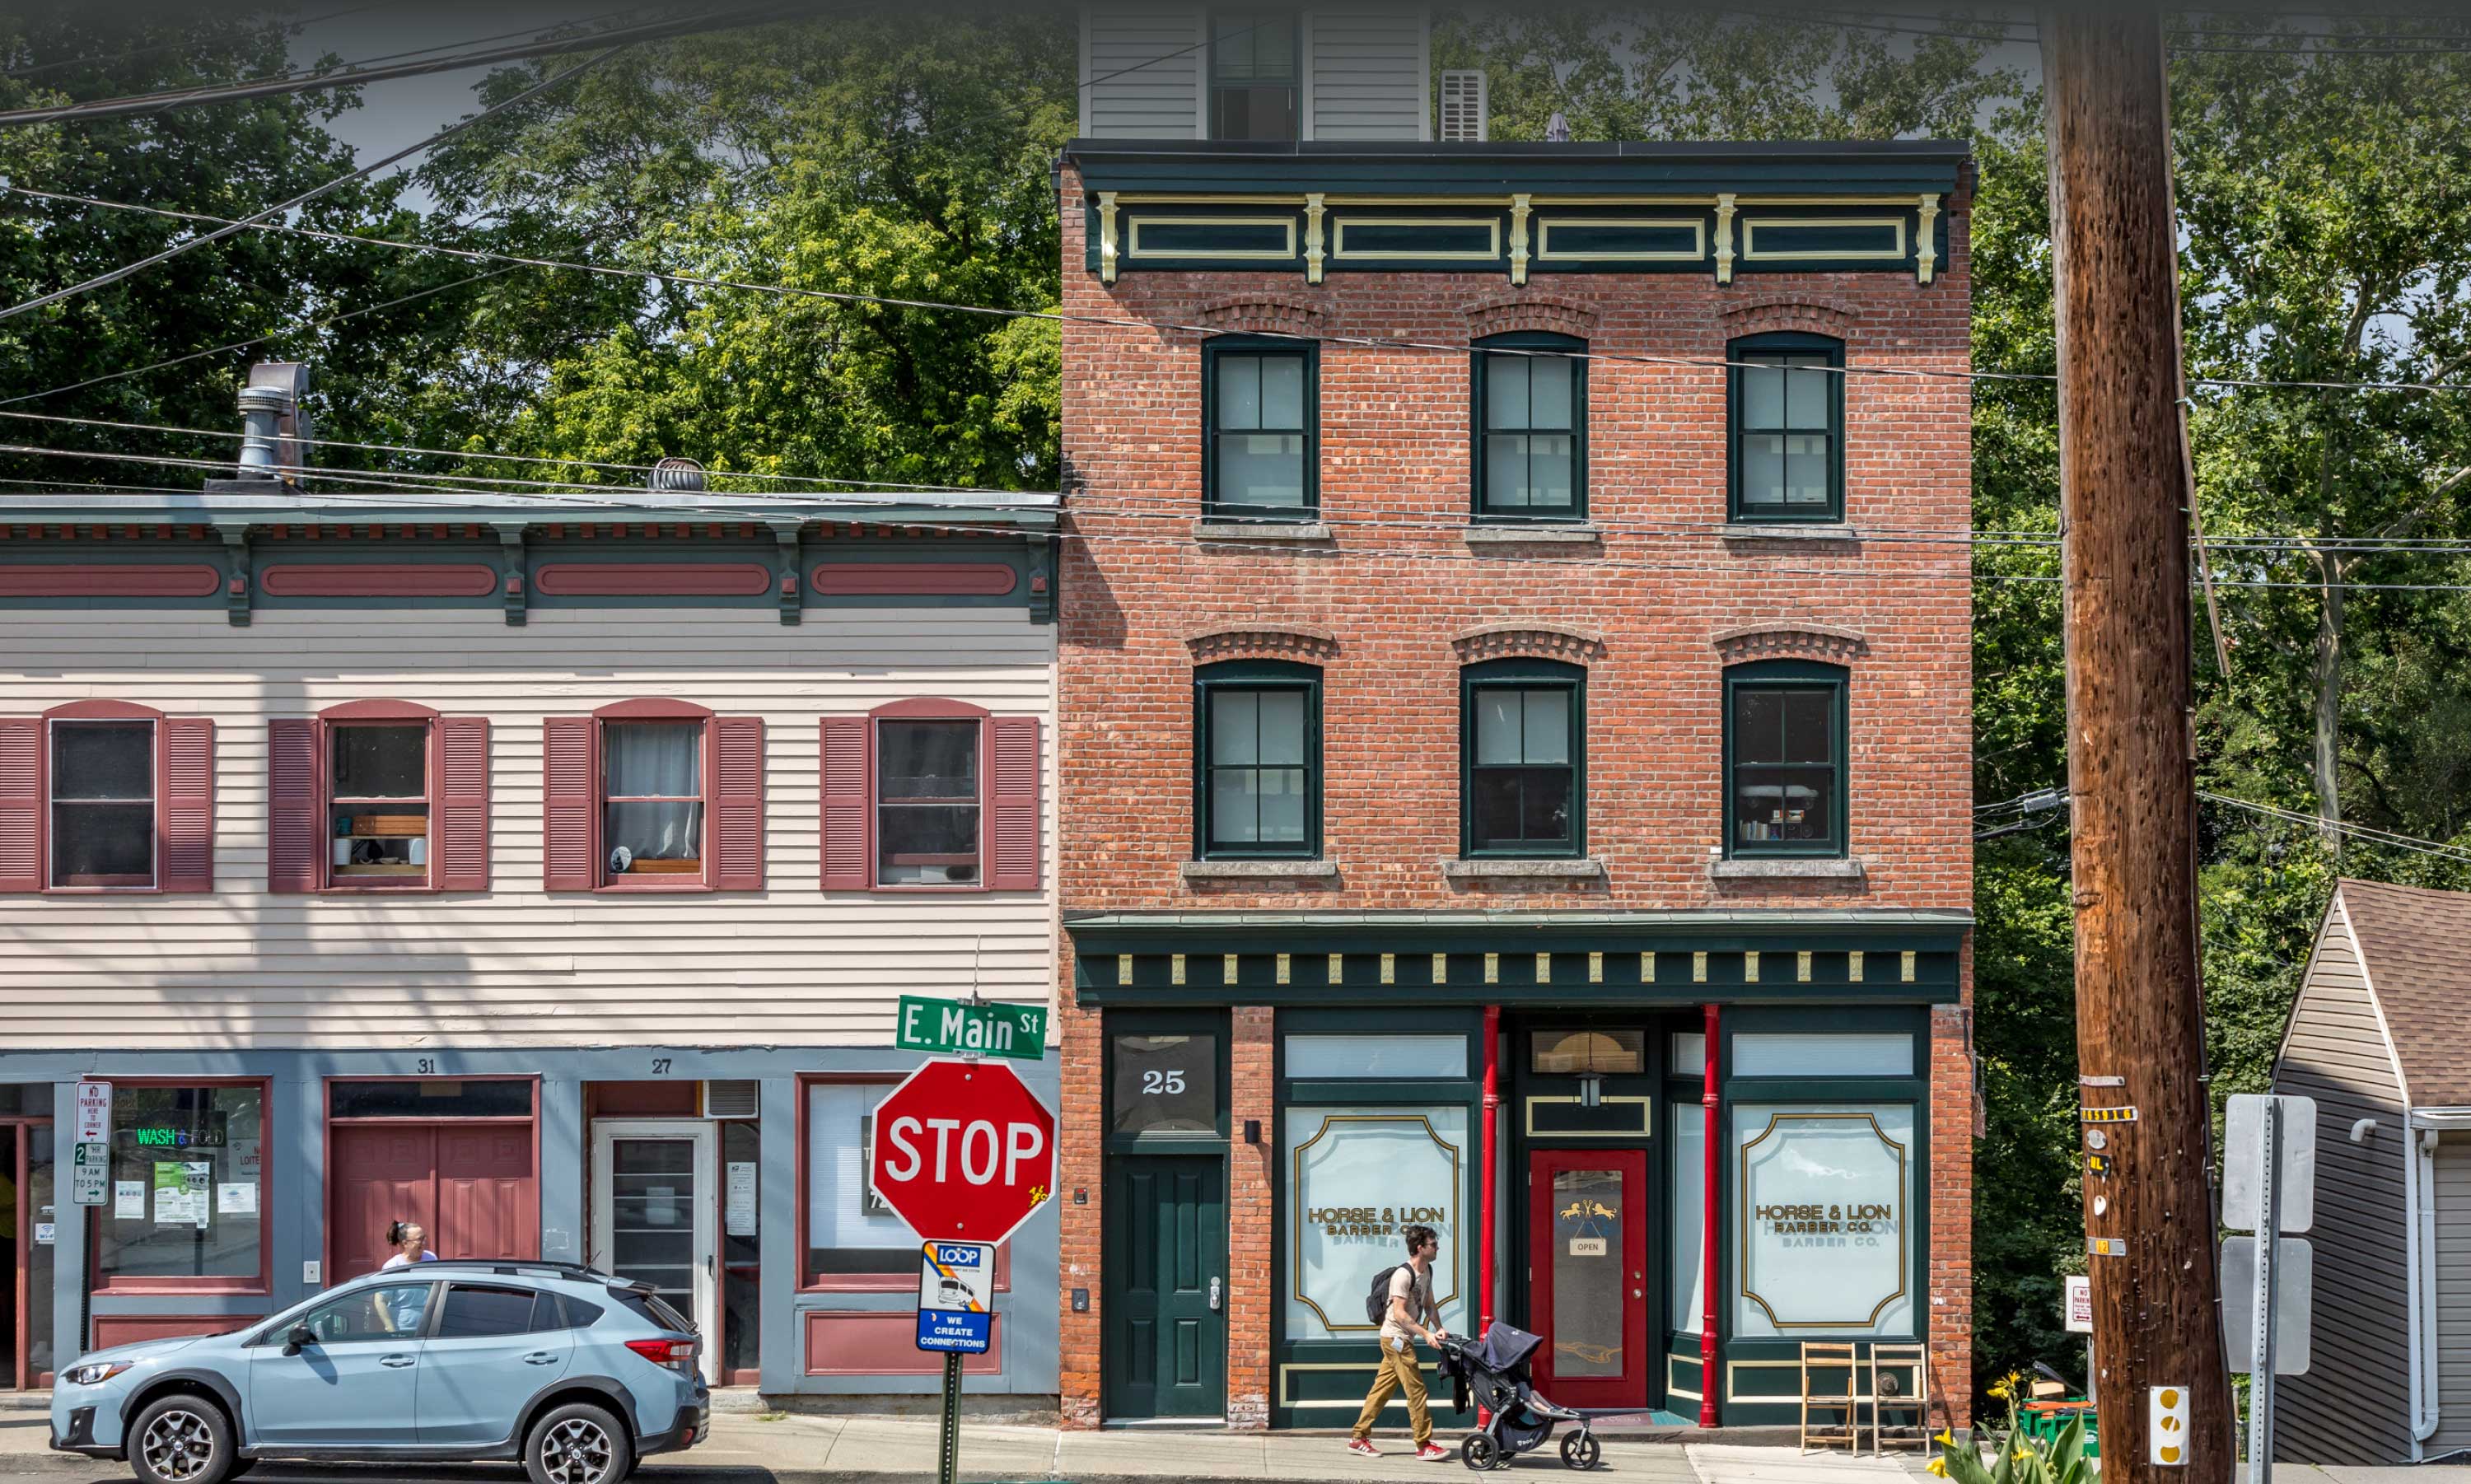 25 E main street commercial storefronts and residential units